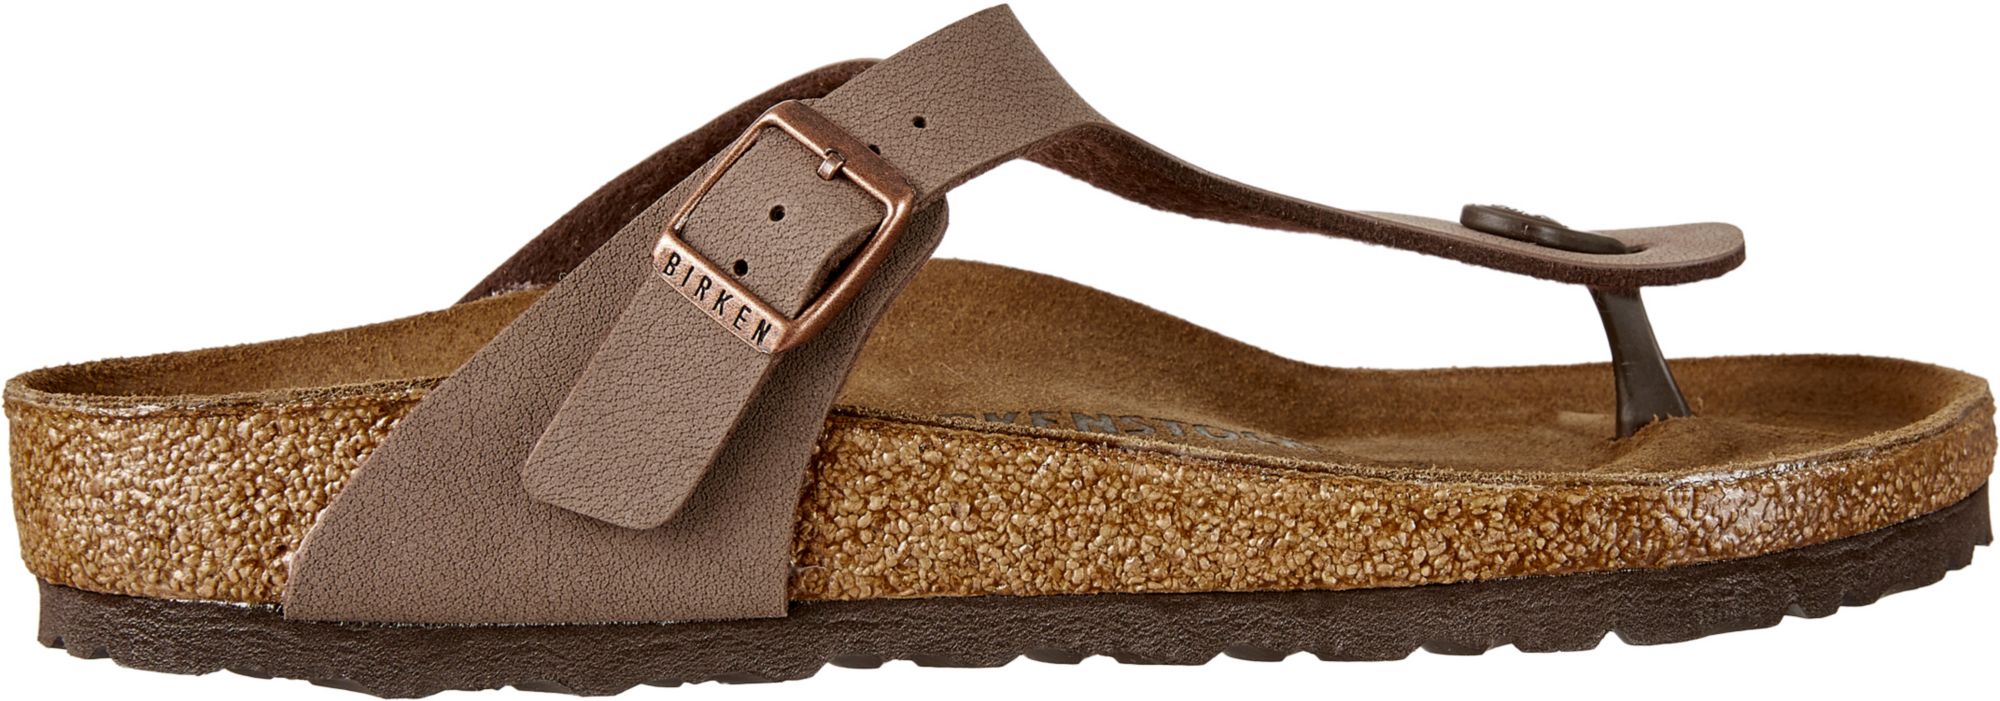 where can you get birkenstocks near me